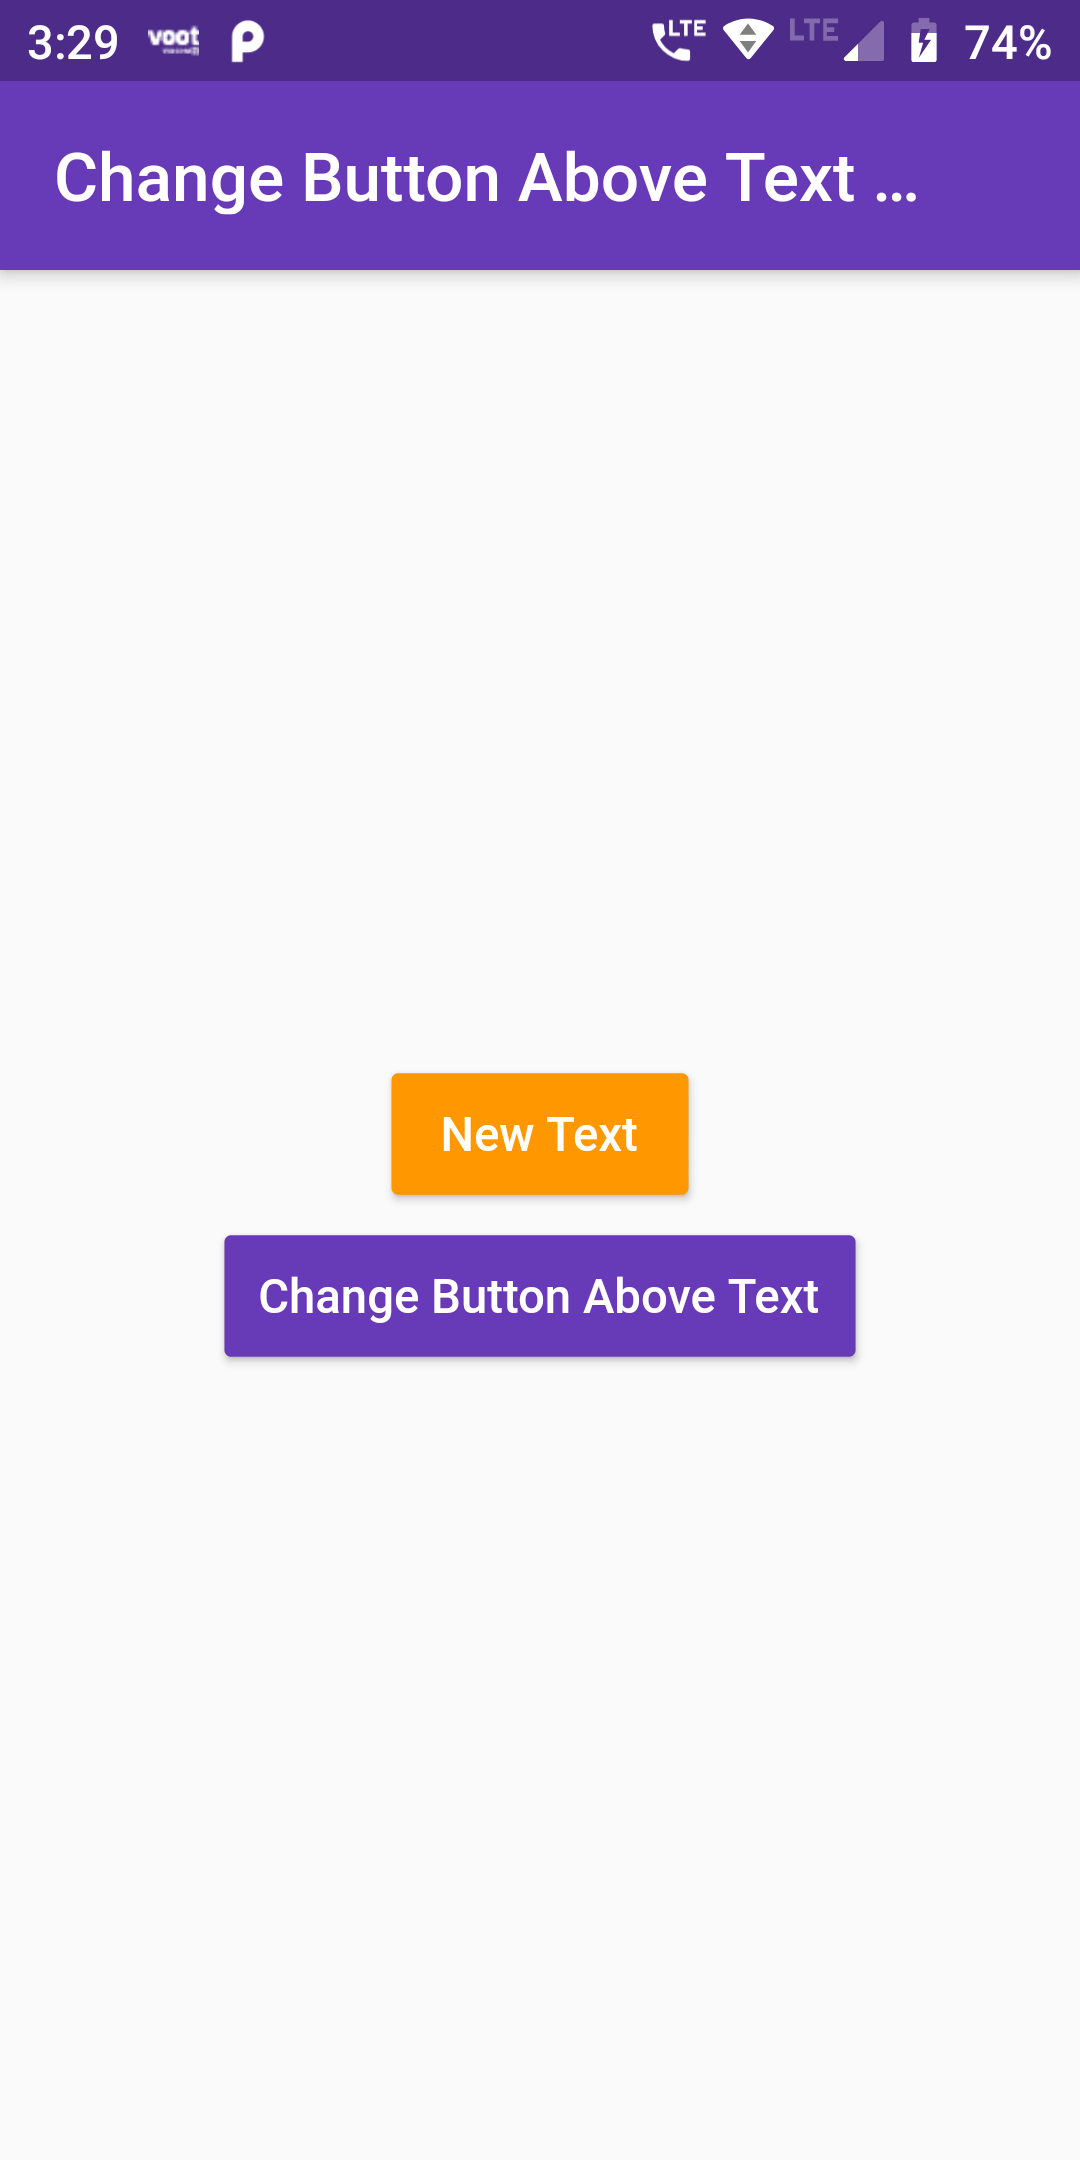 How To Change Button Text Dynamically In Flutter App